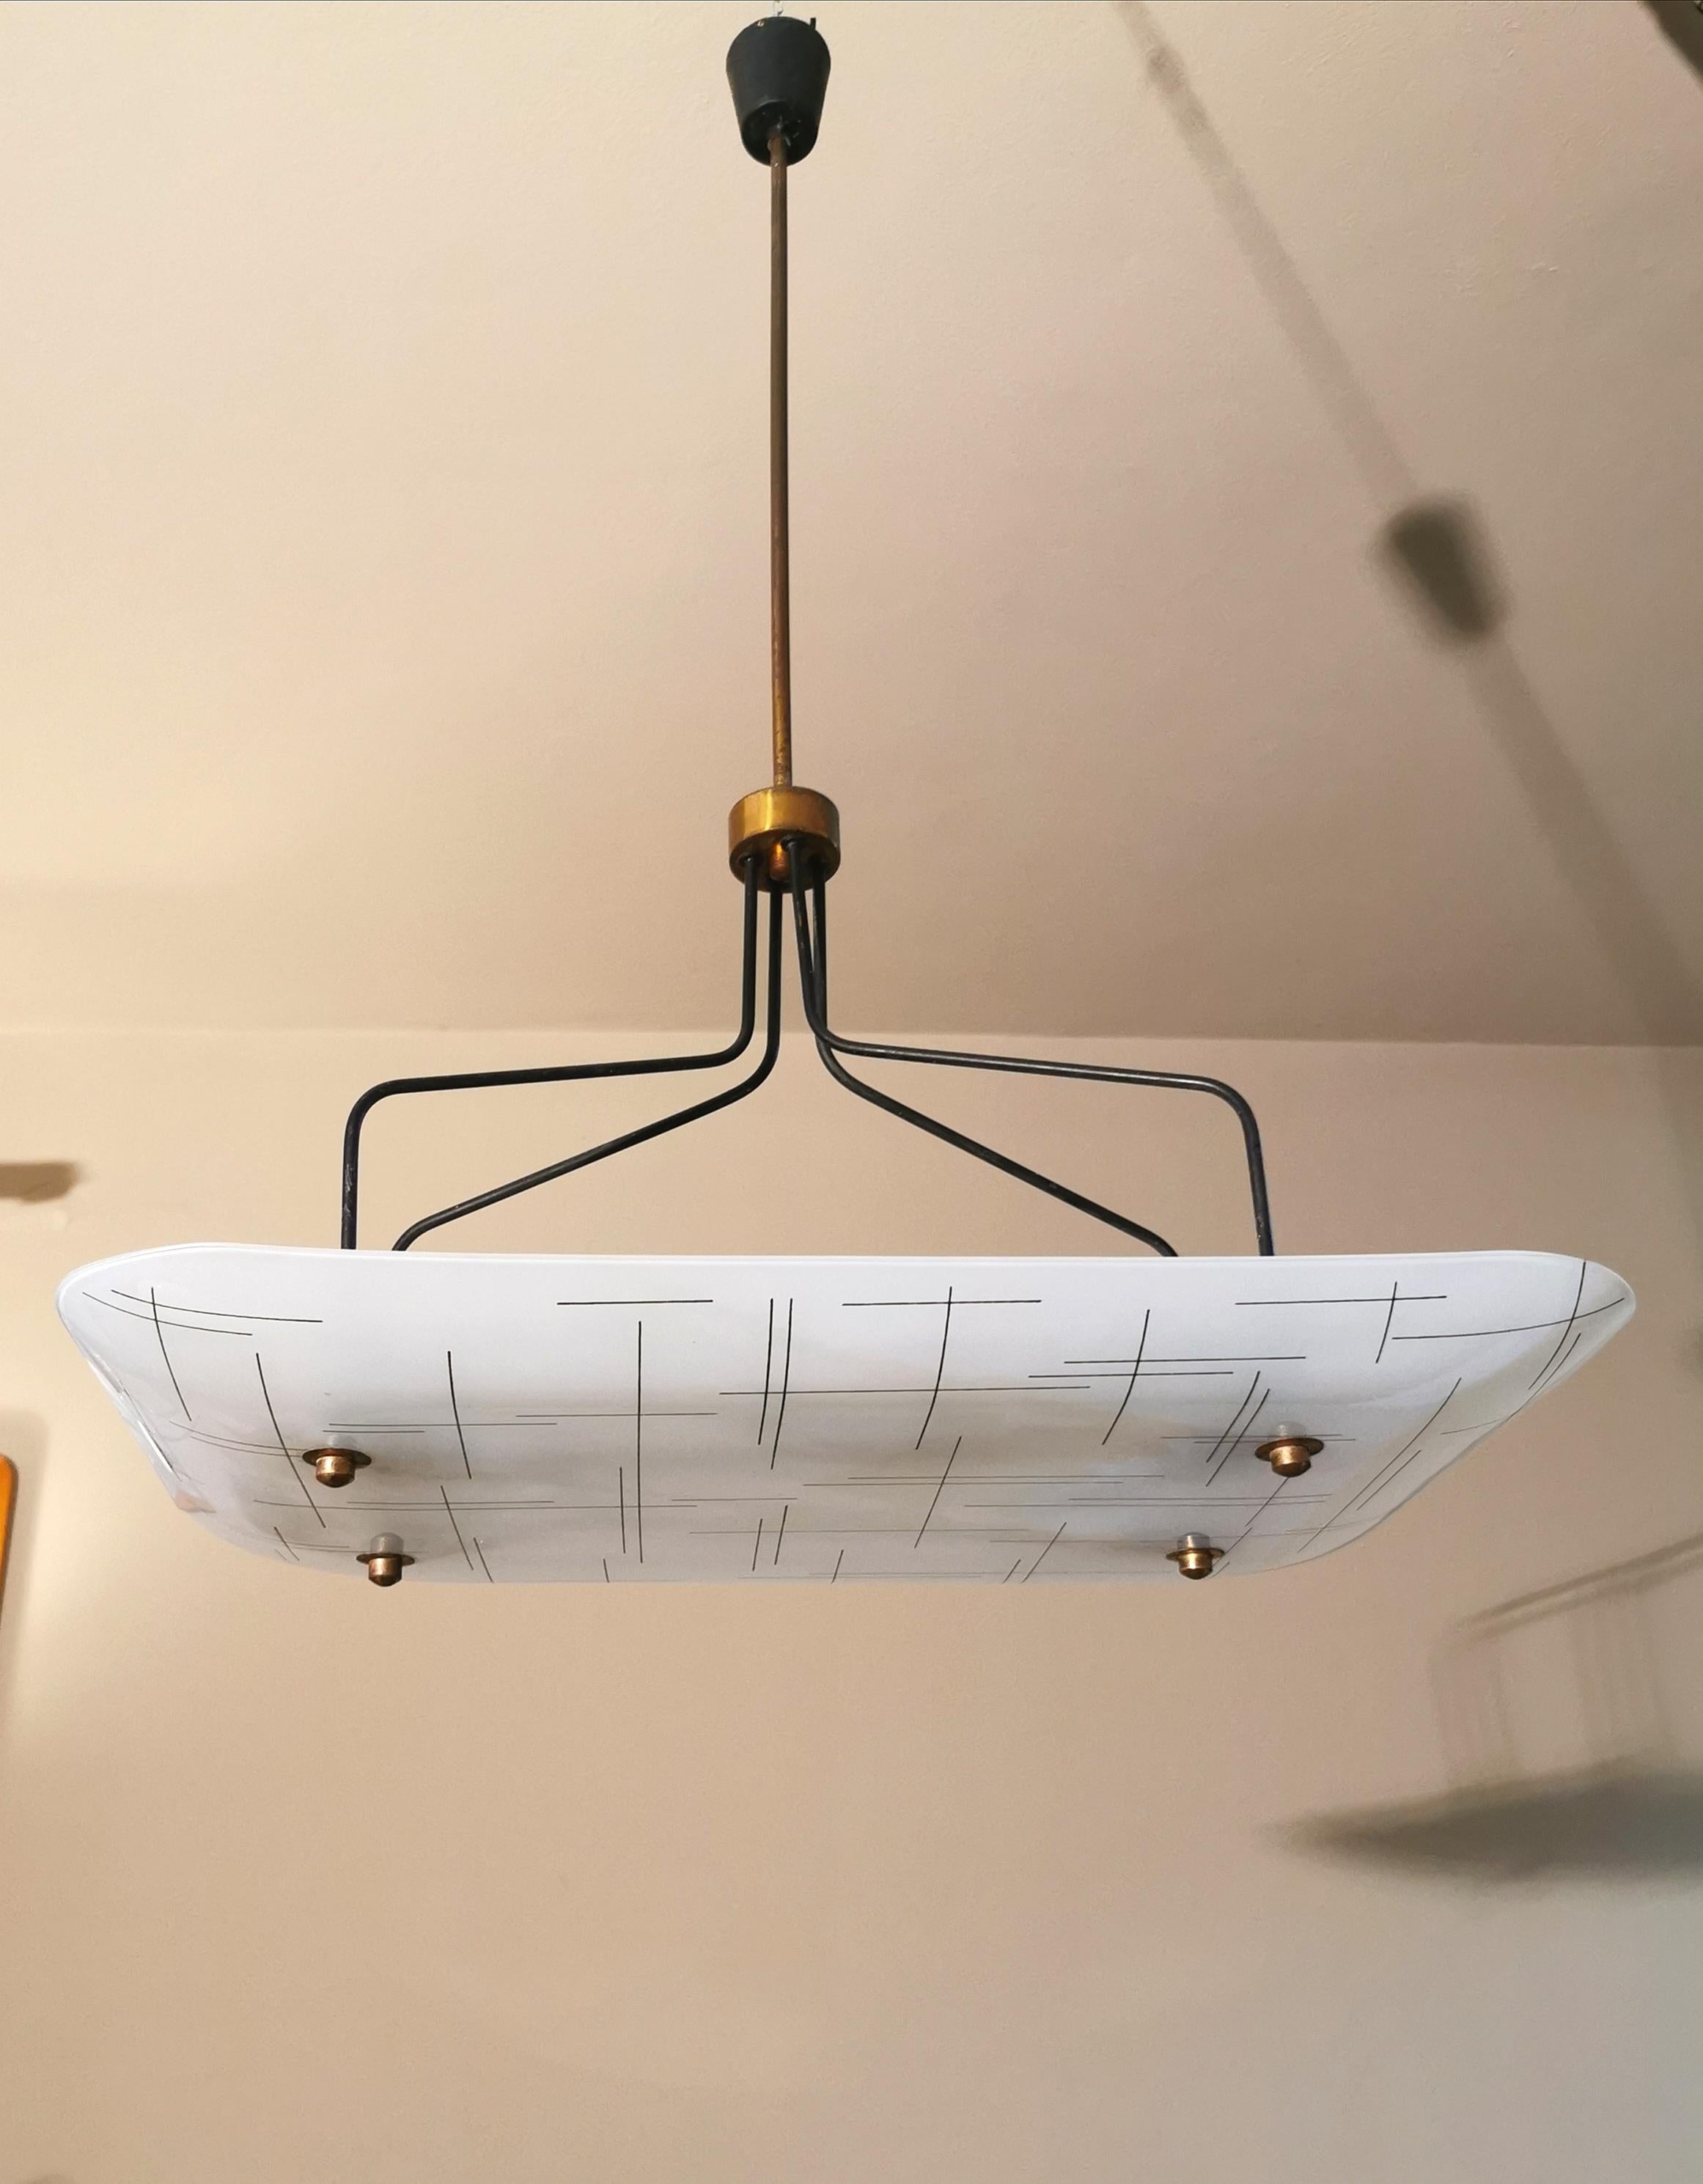 Particular mid-century chandelier by the unknown designer with 4-light brass structure that supports a large white rectangular glass with striped designs. Made in Italy in the 1960s.